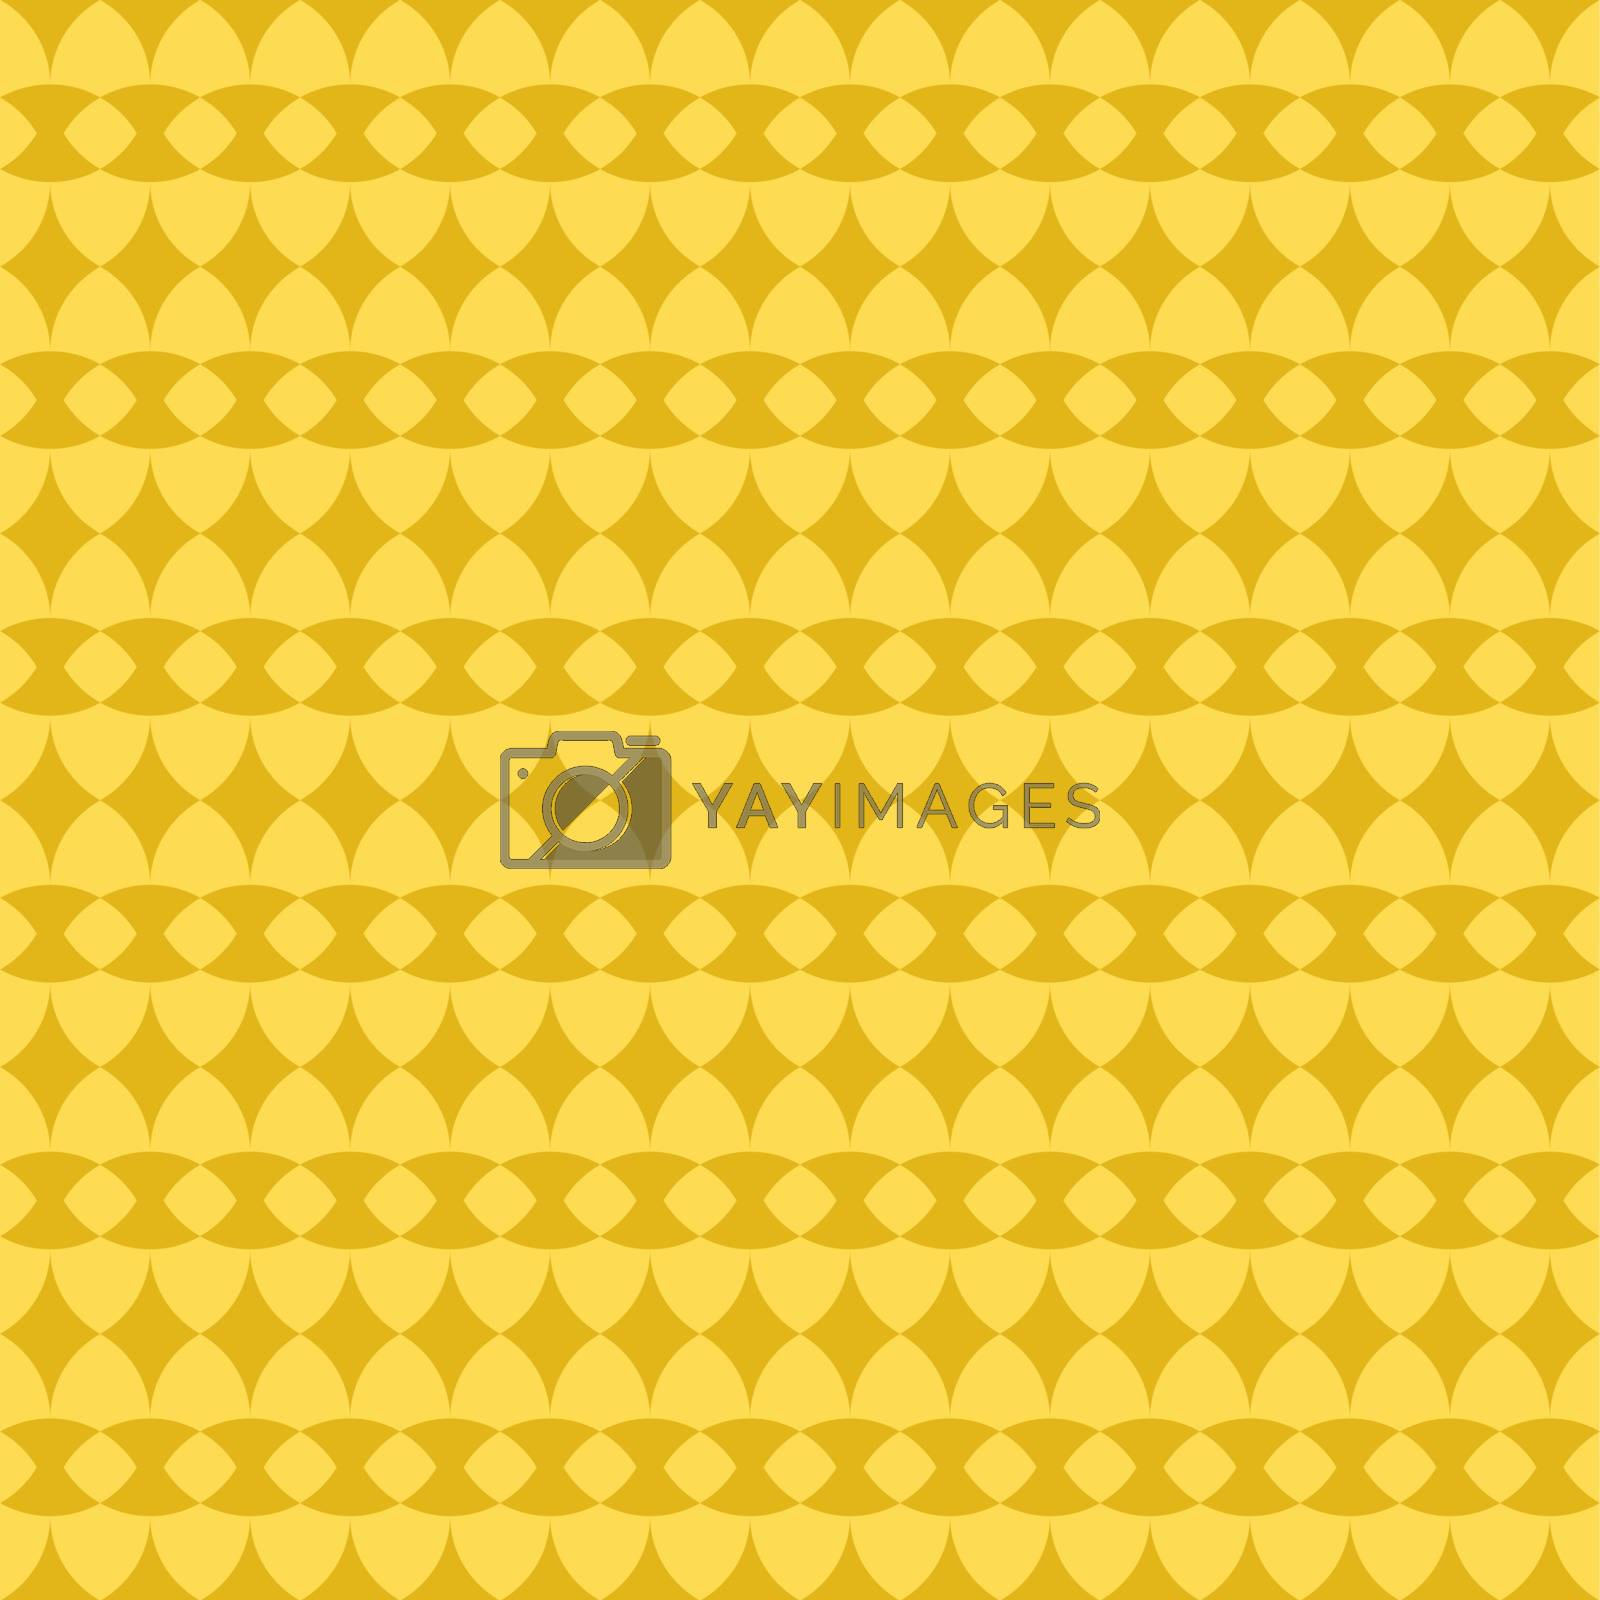 Royalty free image of creative design pattern background vector by vectoraart